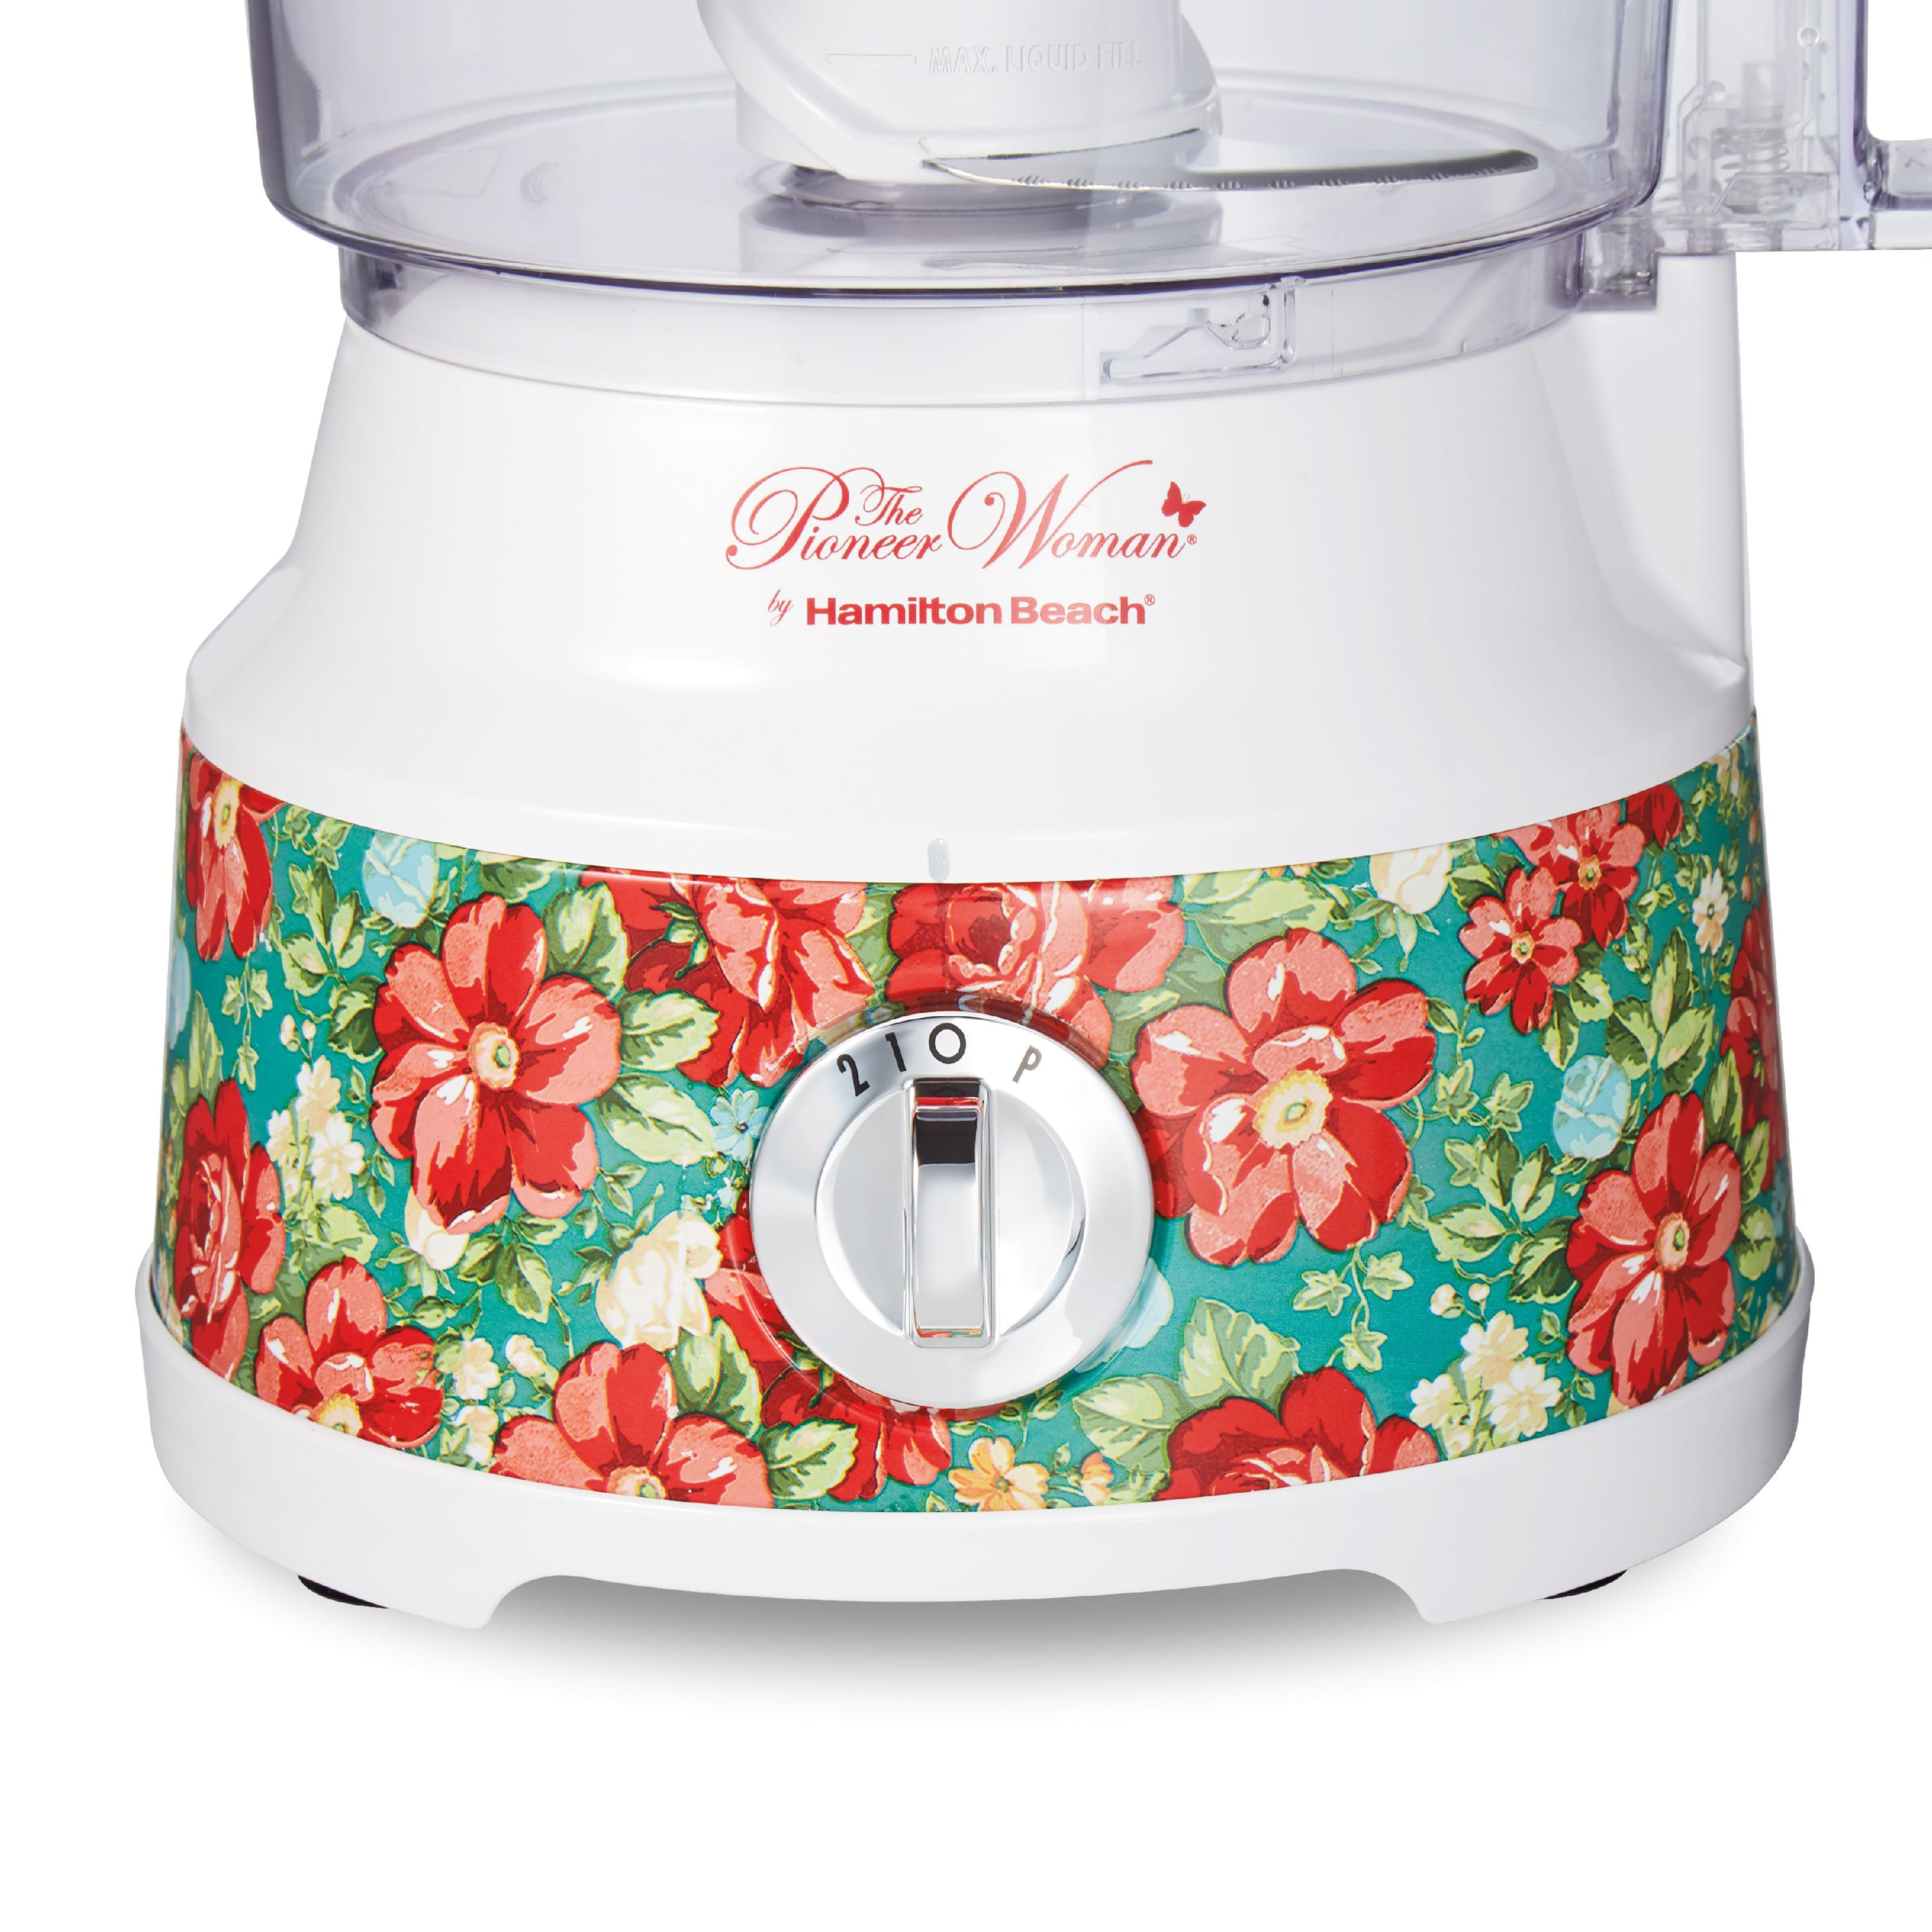 Food Processors for sale in Flowery Branch, Georgia